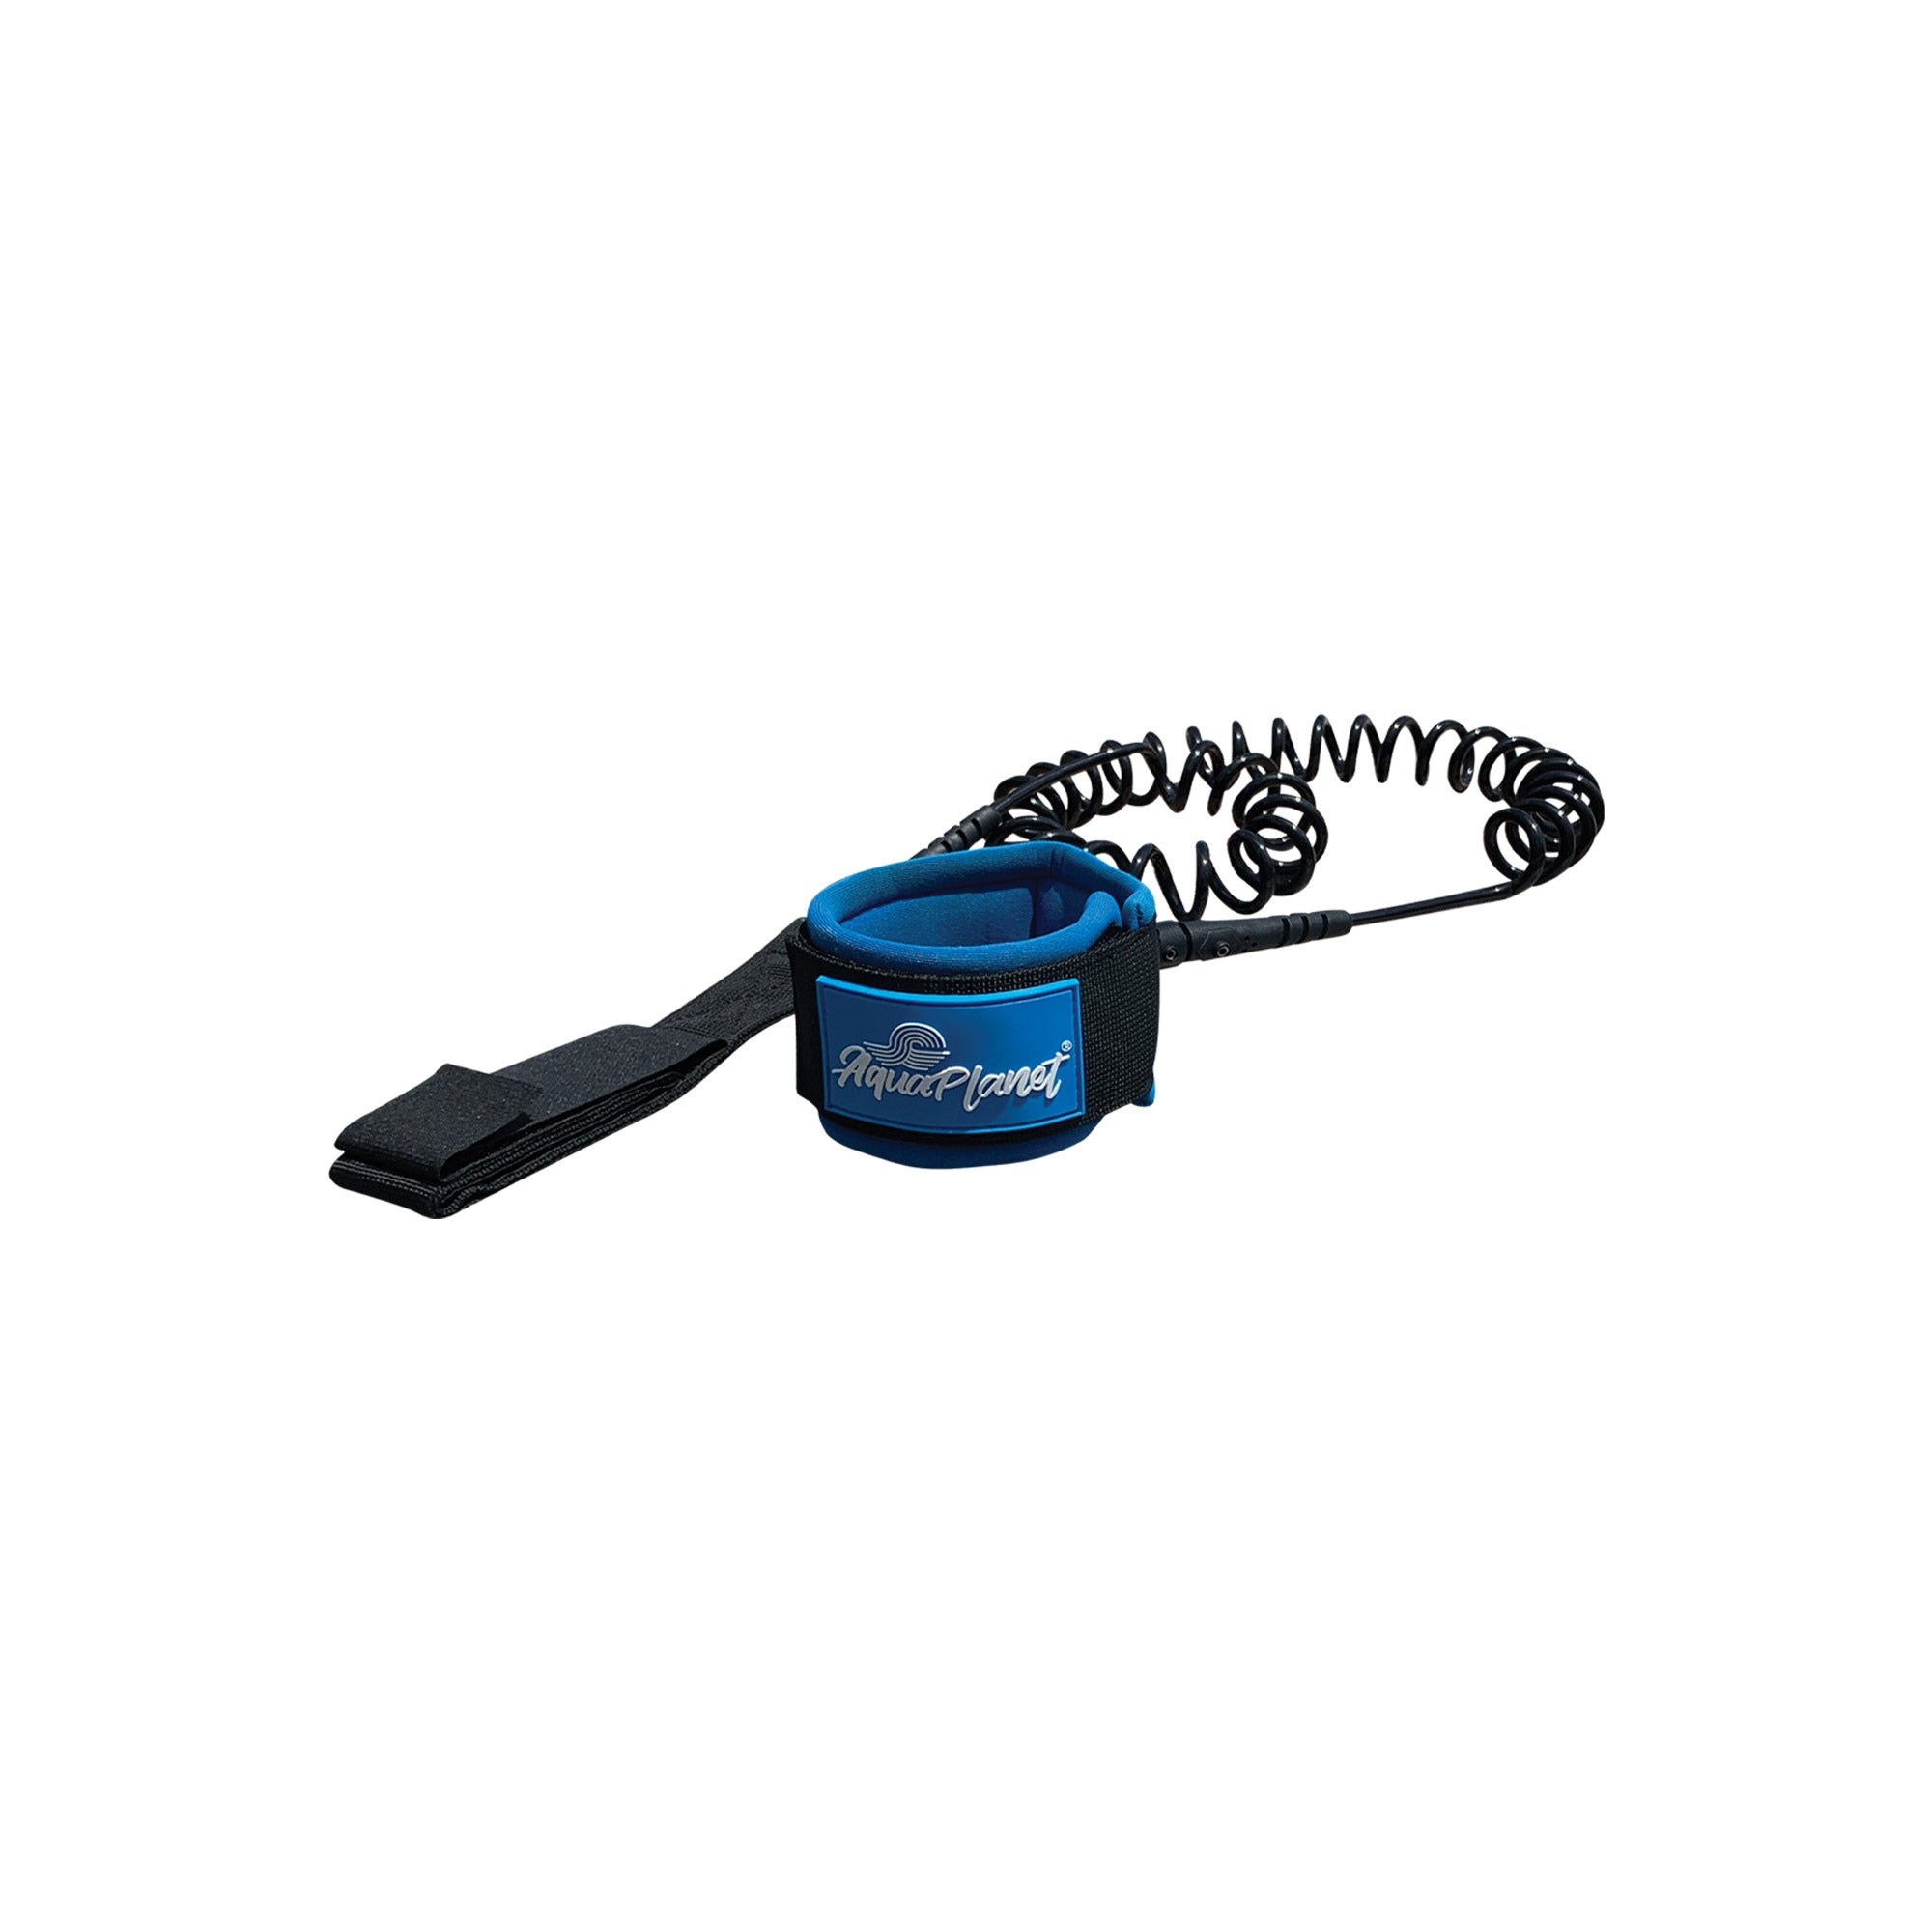 AquaPlanet SUP Stand Up Paddleboard Leash buy now at Heysurf.com